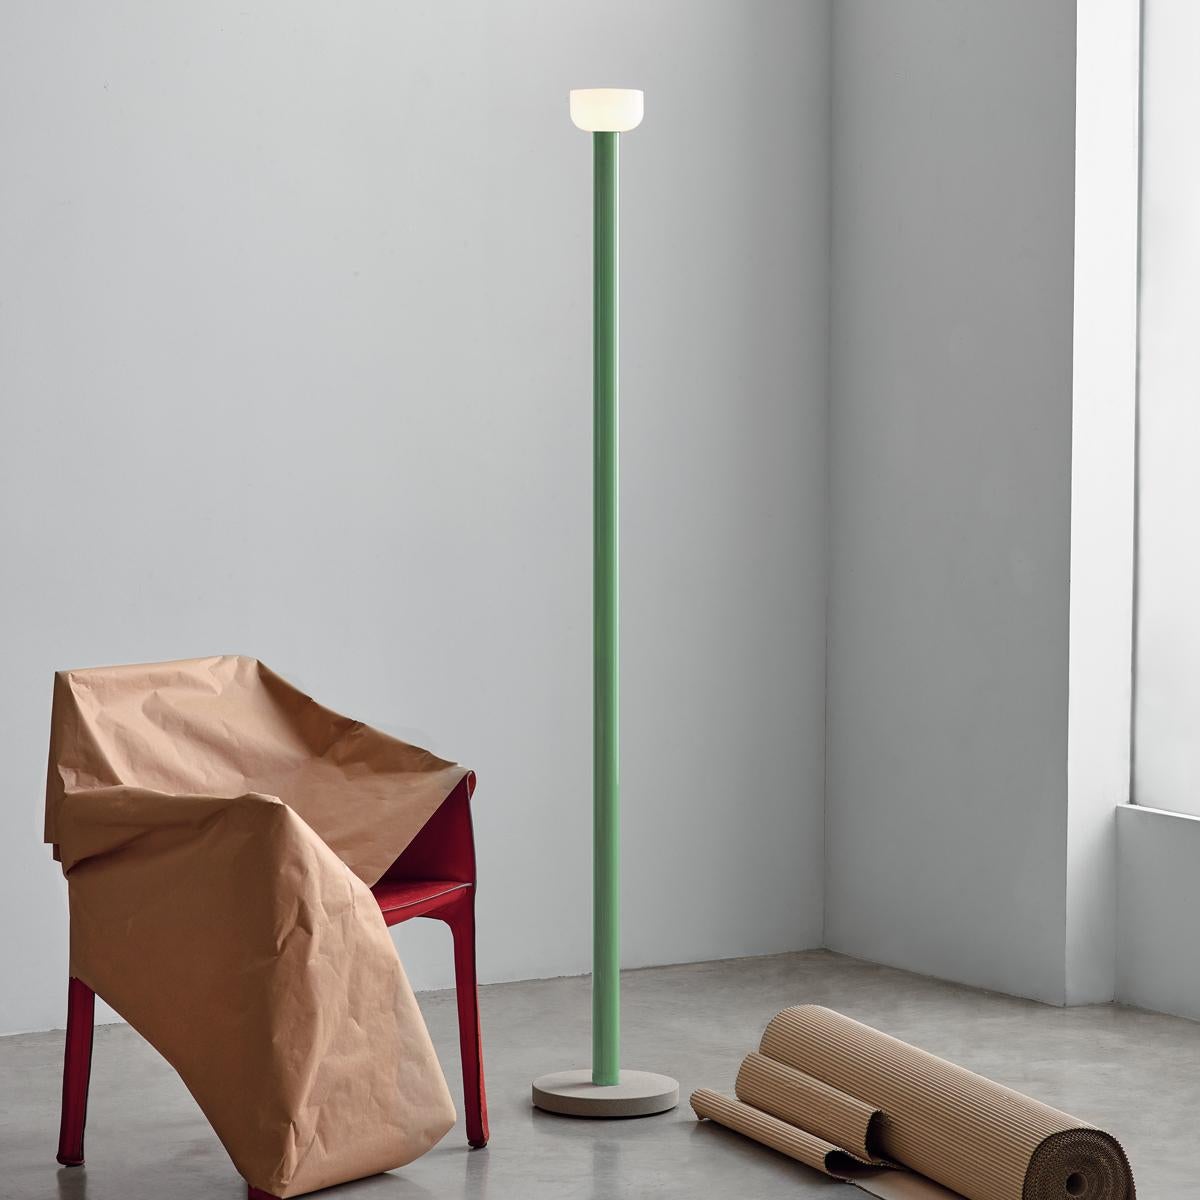 Flos Bellhop Floor Lamp in Green Body with White Diffuser In Excellent Condition For Sale In Brooklyn, NY